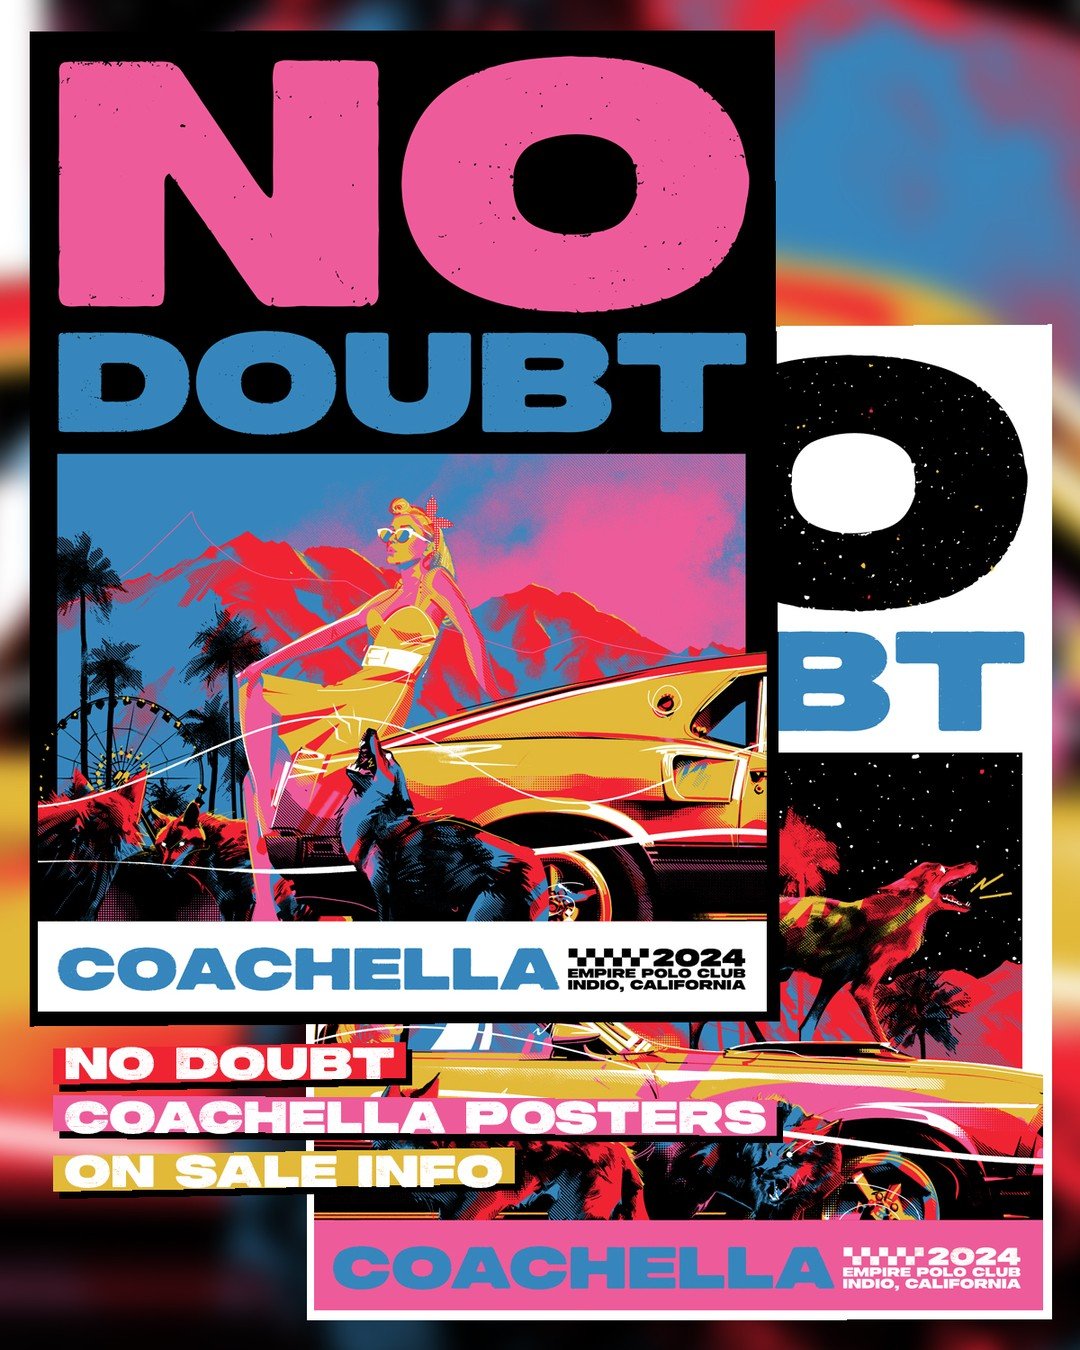 ON SALE INFO!

I will be putting my AP copies of No Doubt's Coachella poster on sale THIS WEDNESDAY (4/24) at matttaylordraws.bigcartel.com

They will be priced at $75 each (+ postage) and there's a limit of one per design per customer. Any multiple 